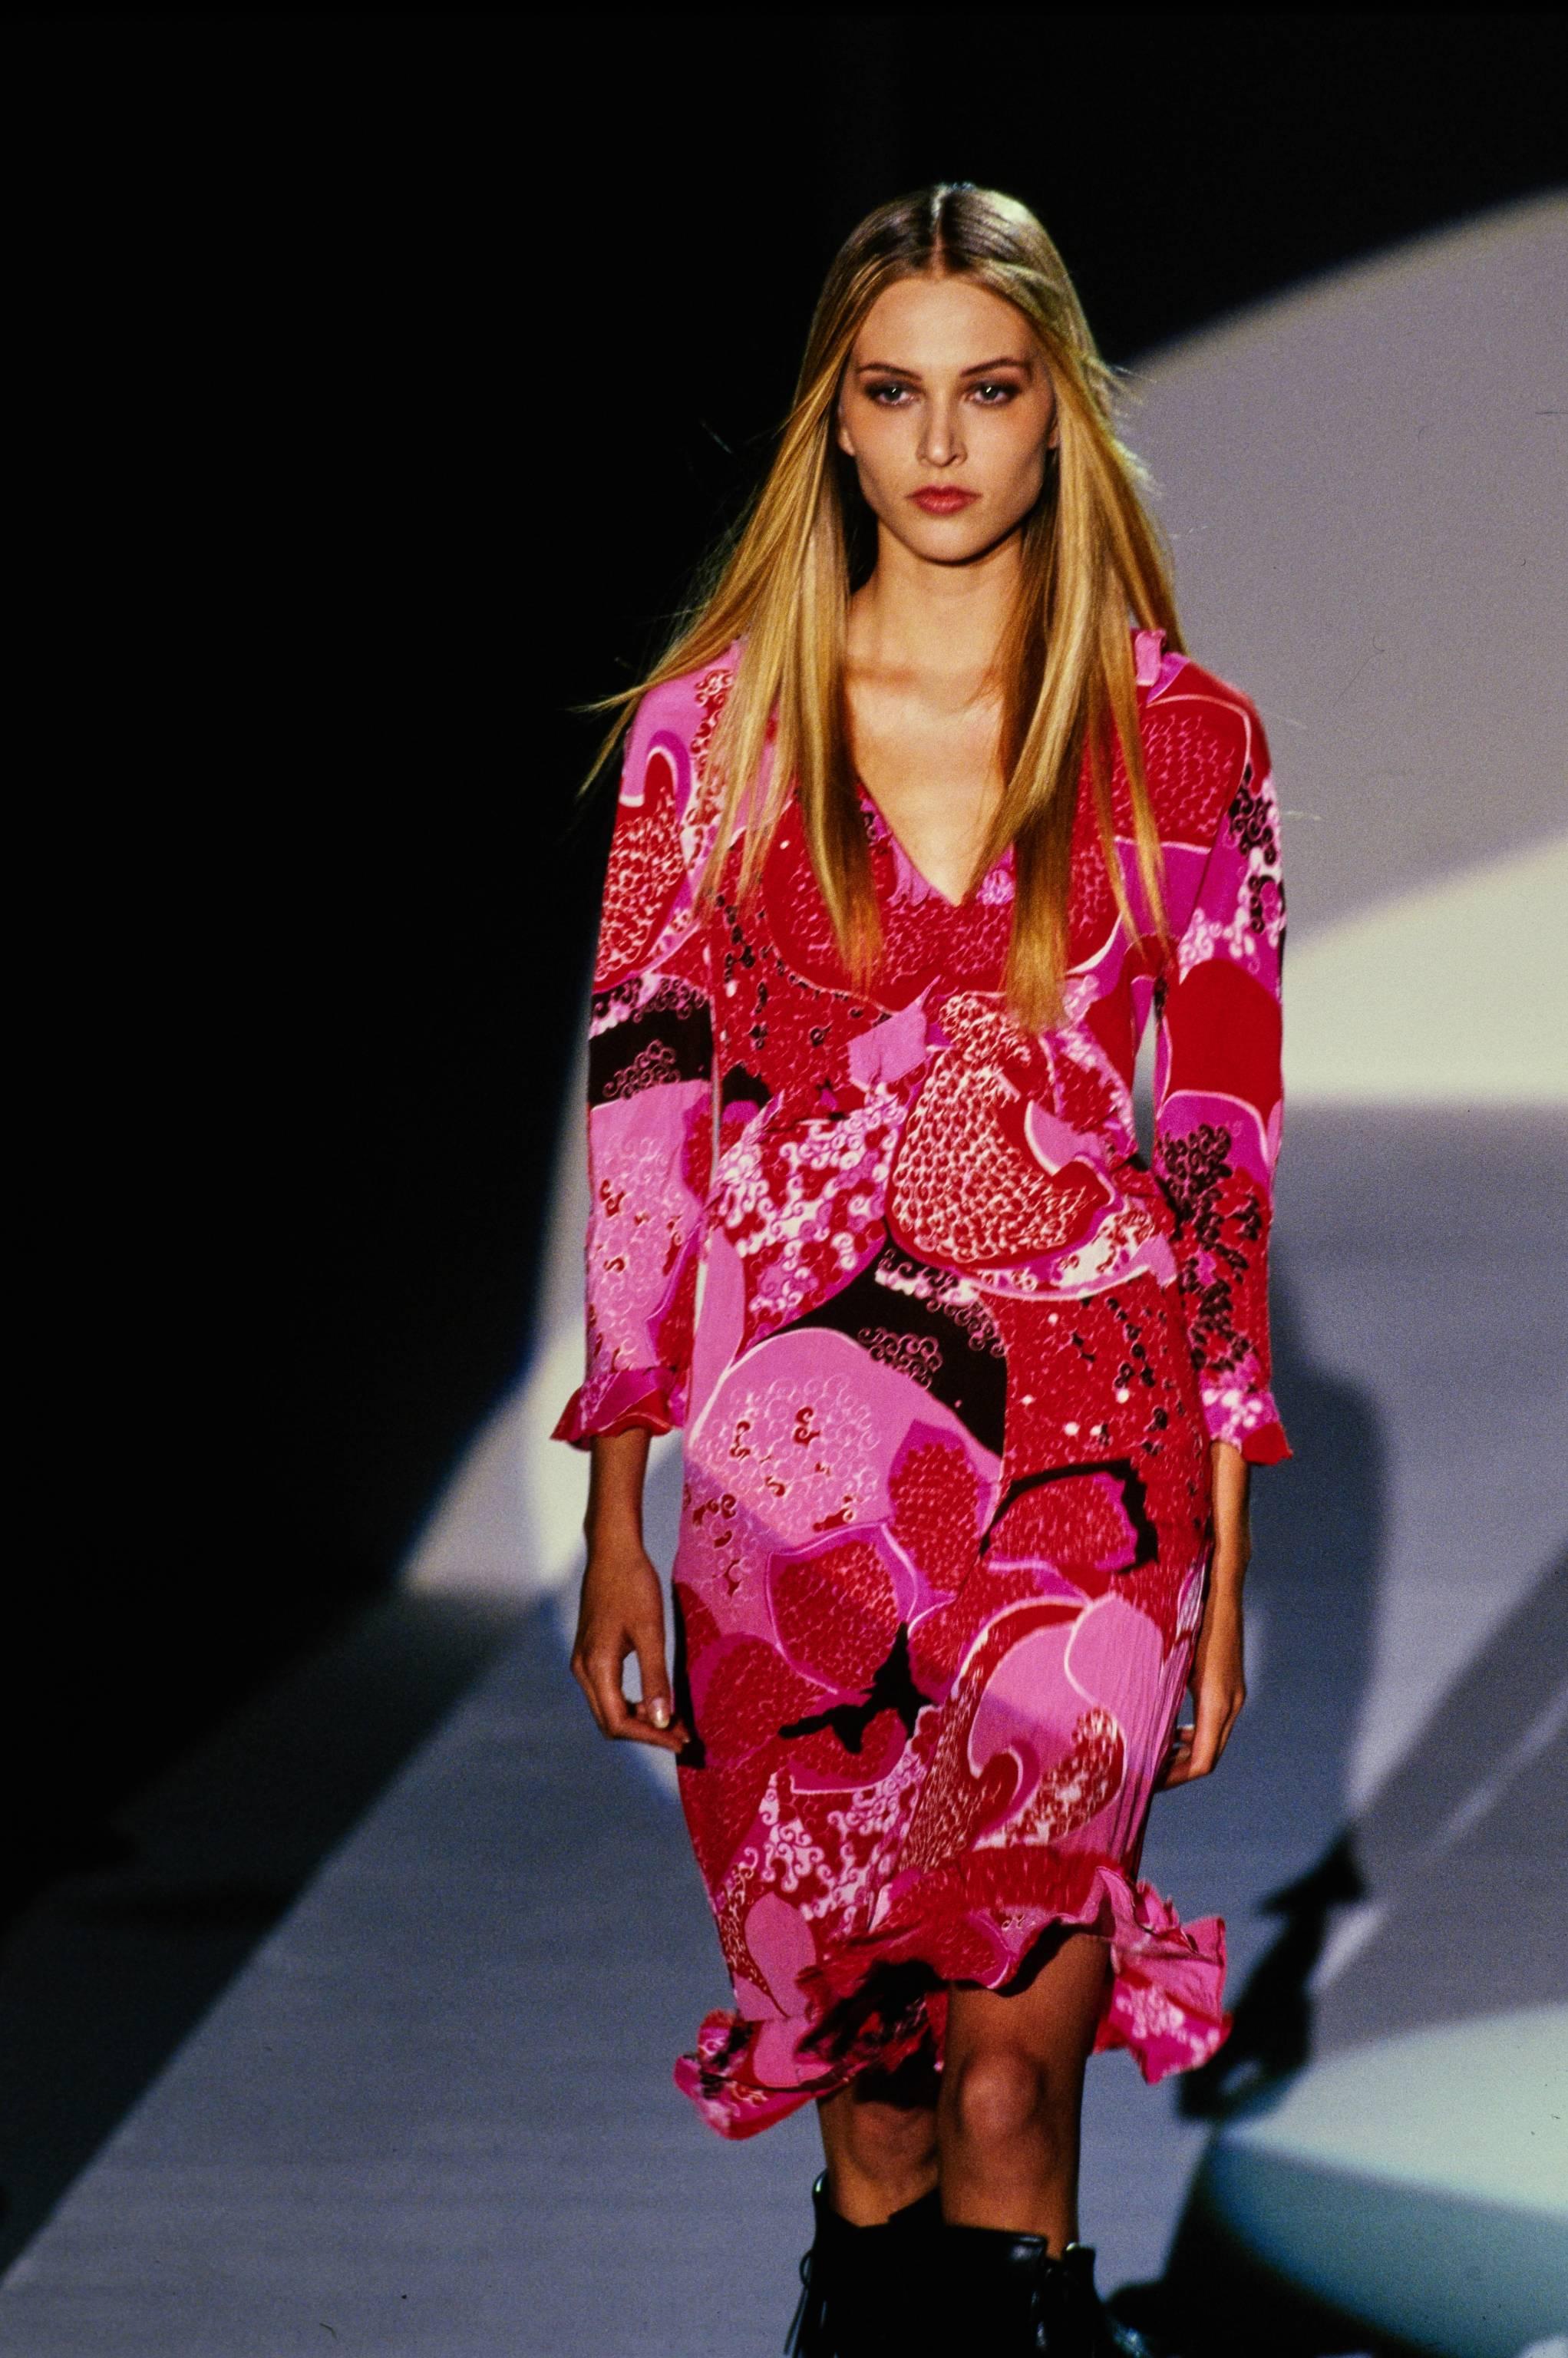 Presenting an 'Acid Flower' silk button-up top in pink from Tom Ford's 'Las Vegas Hippy' collection for Gucci. The S/S 1999 collection is remembered for its drastic departure from Tom Ford's signature sleek minimalism. After the success of his